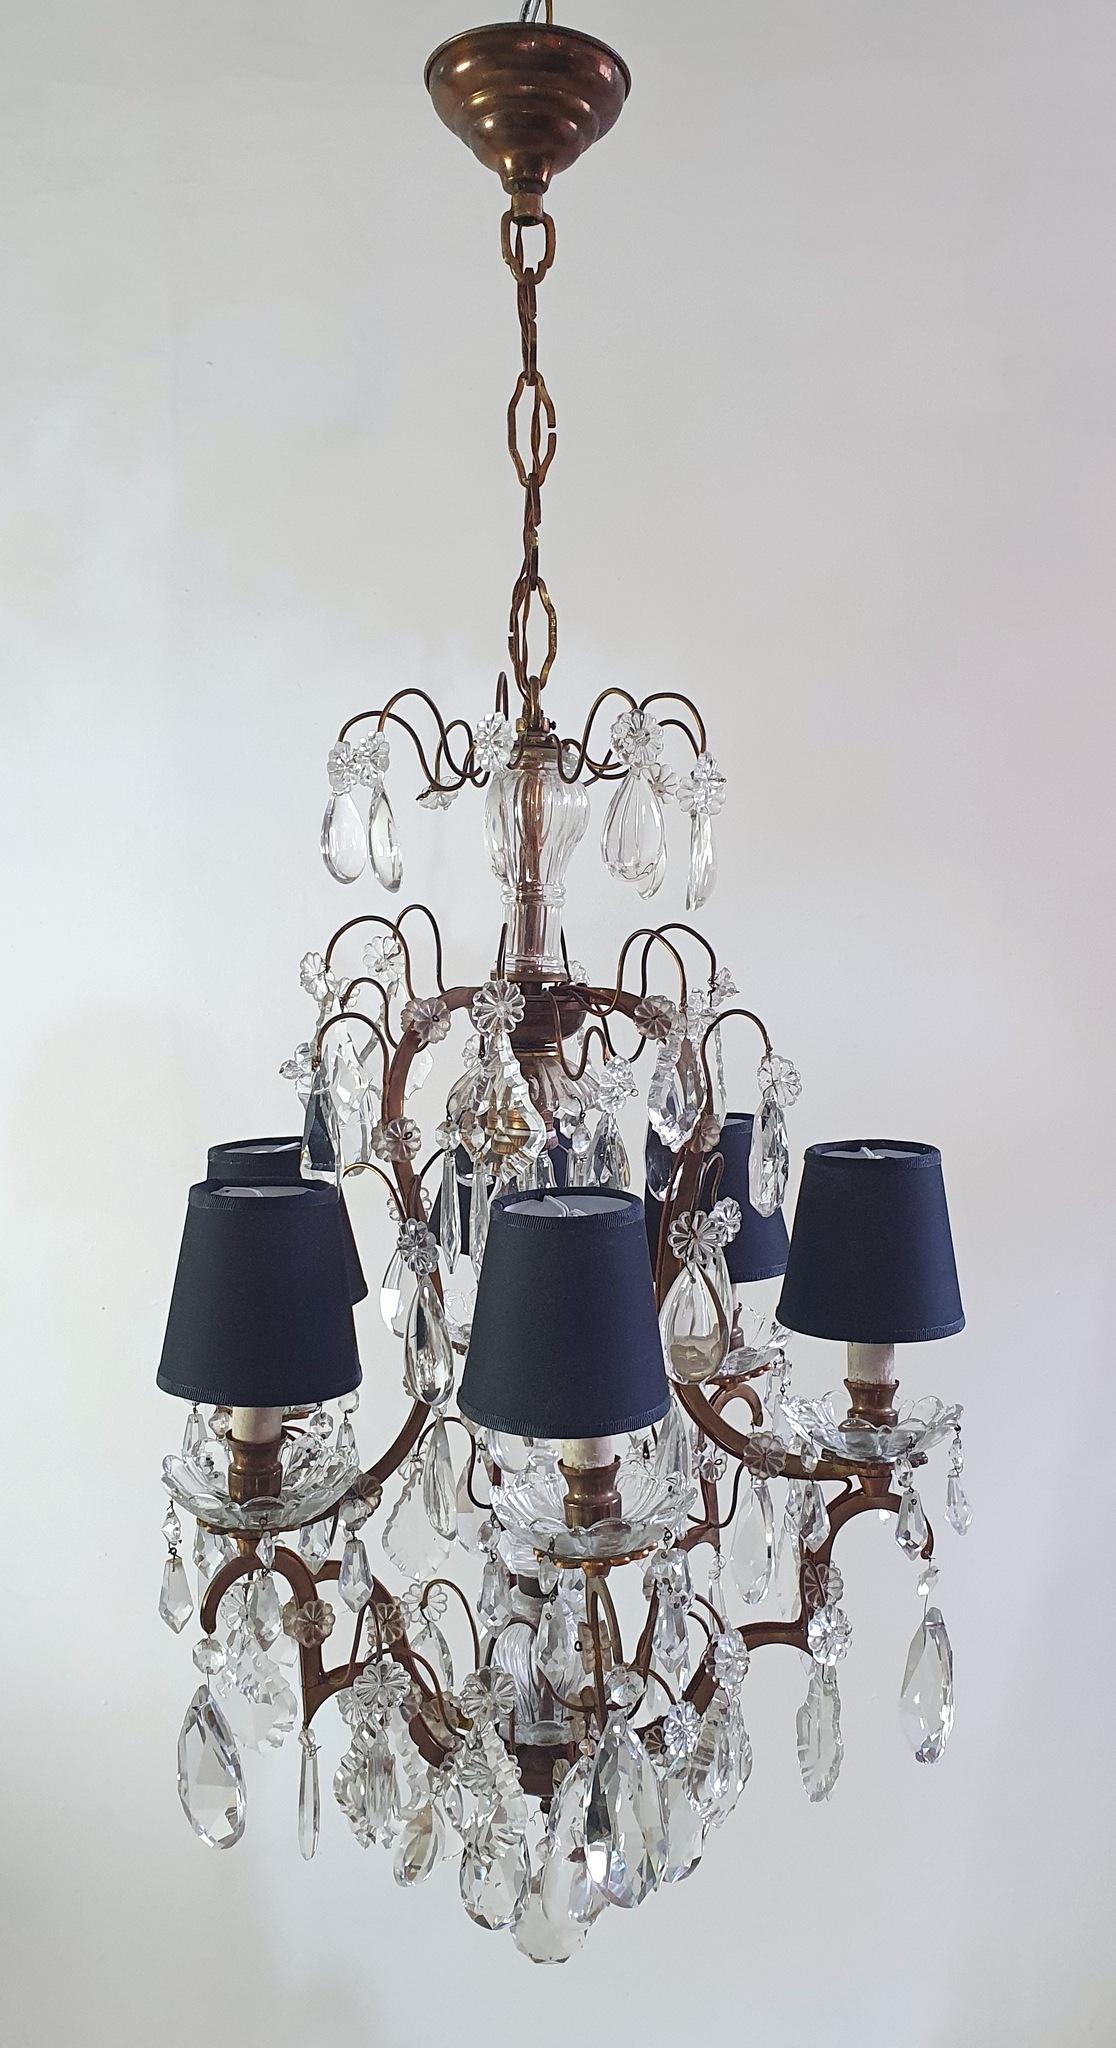 This is a classic Rococo style chandelier hand made in Italy circa 1940 with an array of crystals on a brass frame. The chandelier has six candle shaped E14 lights which have been paired with black lampshades which really is a great combination of